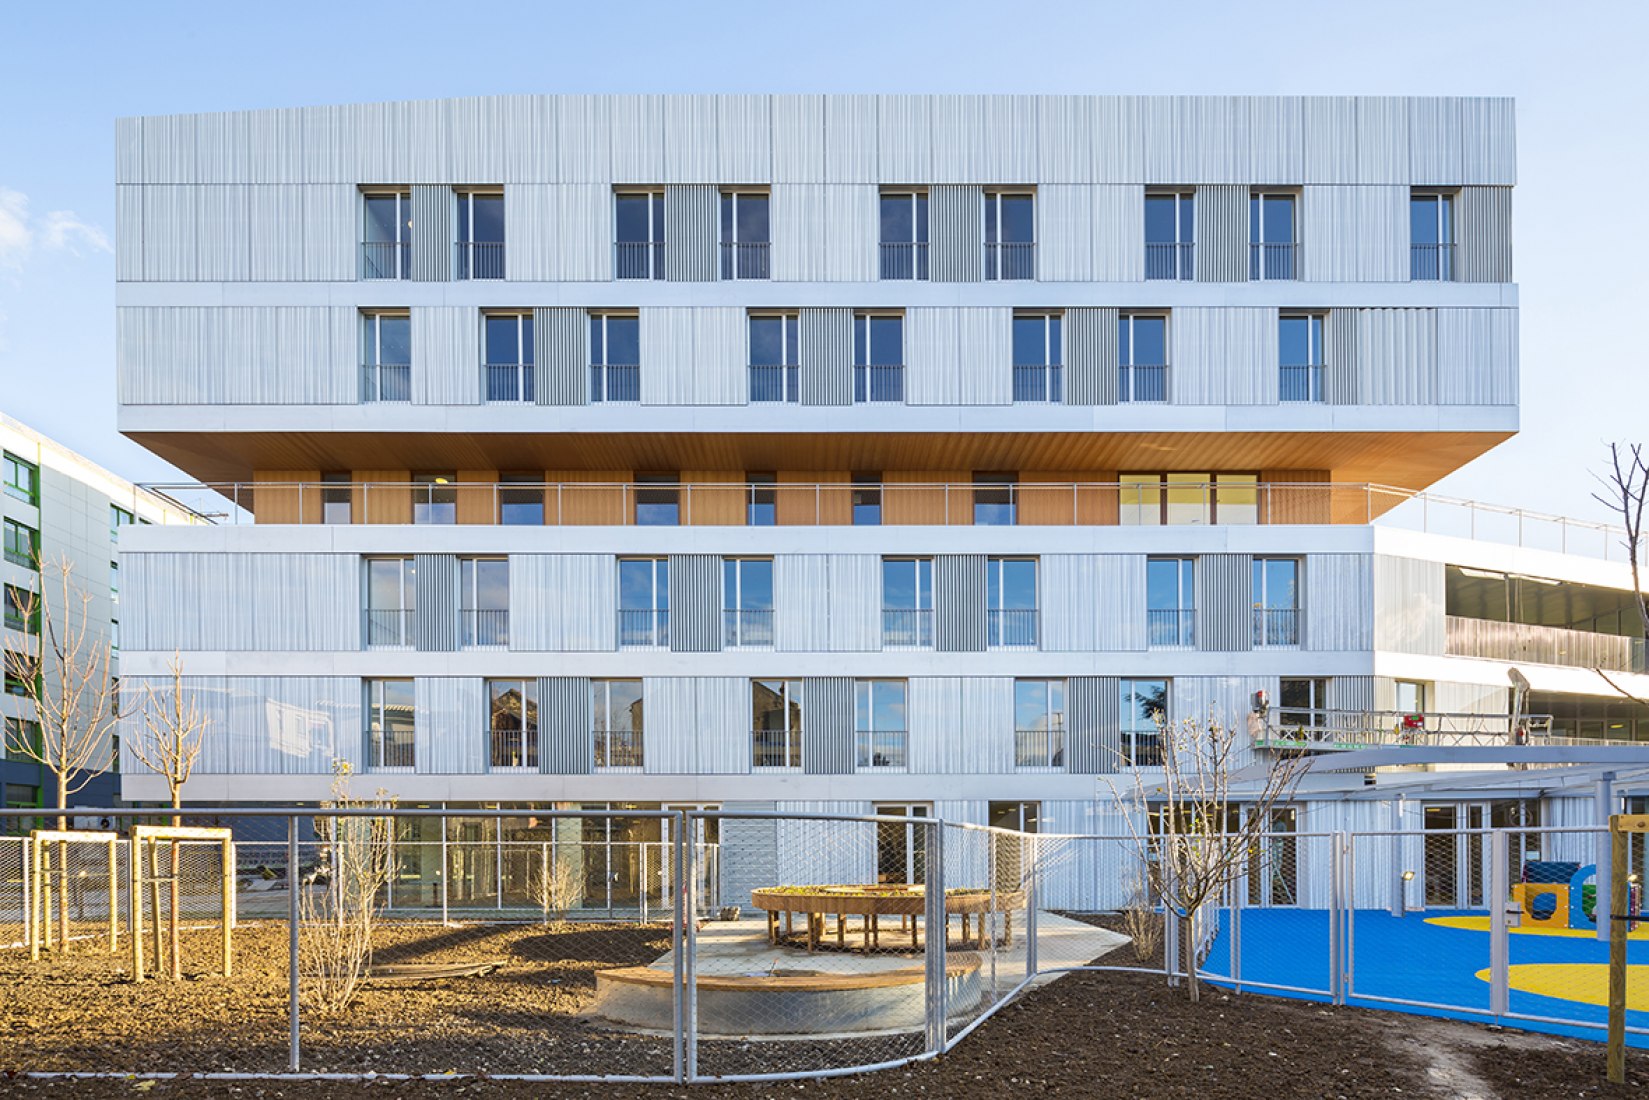 Exterior view of the residential care-home for the elderly in Paris, by AZC. Photography © Sergio Grazia.